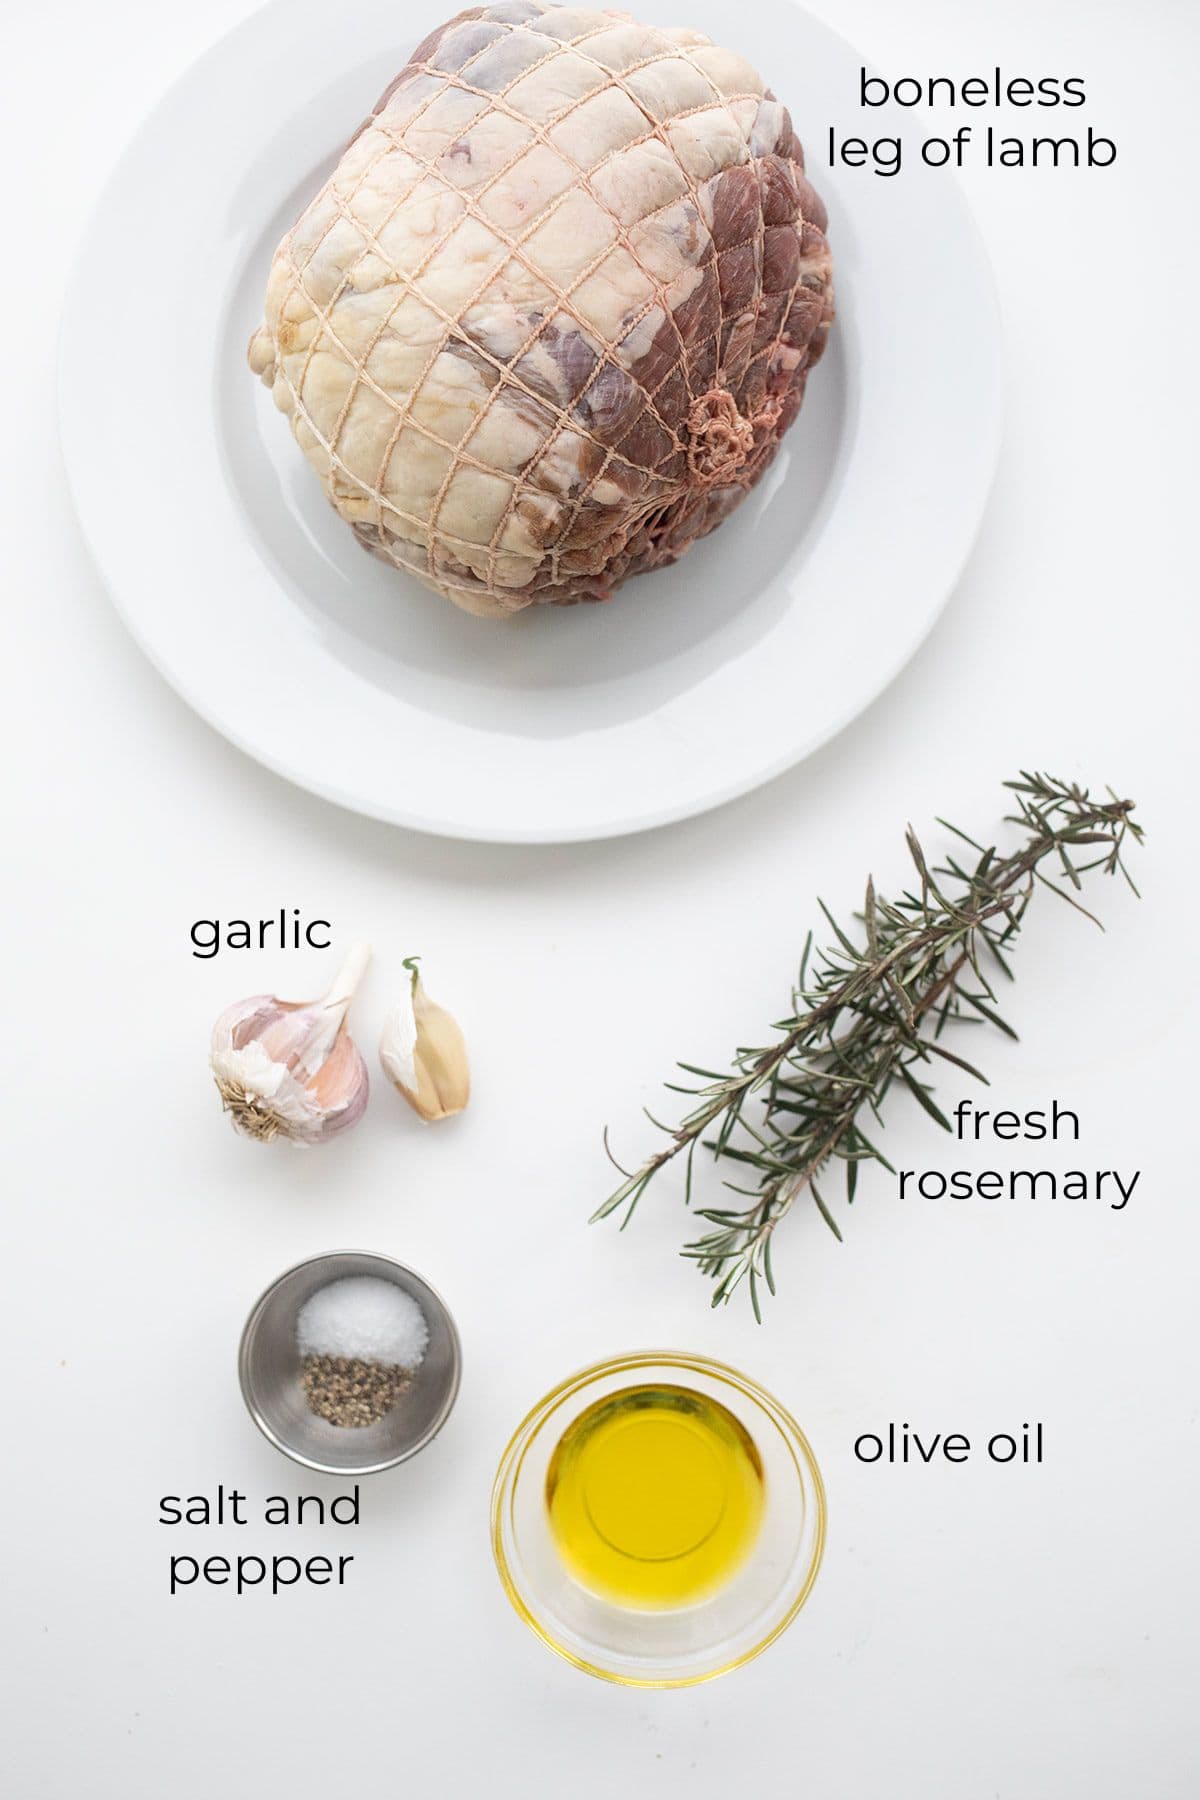 Top down image of ingredients for Instant Pot Leg of Lamb.